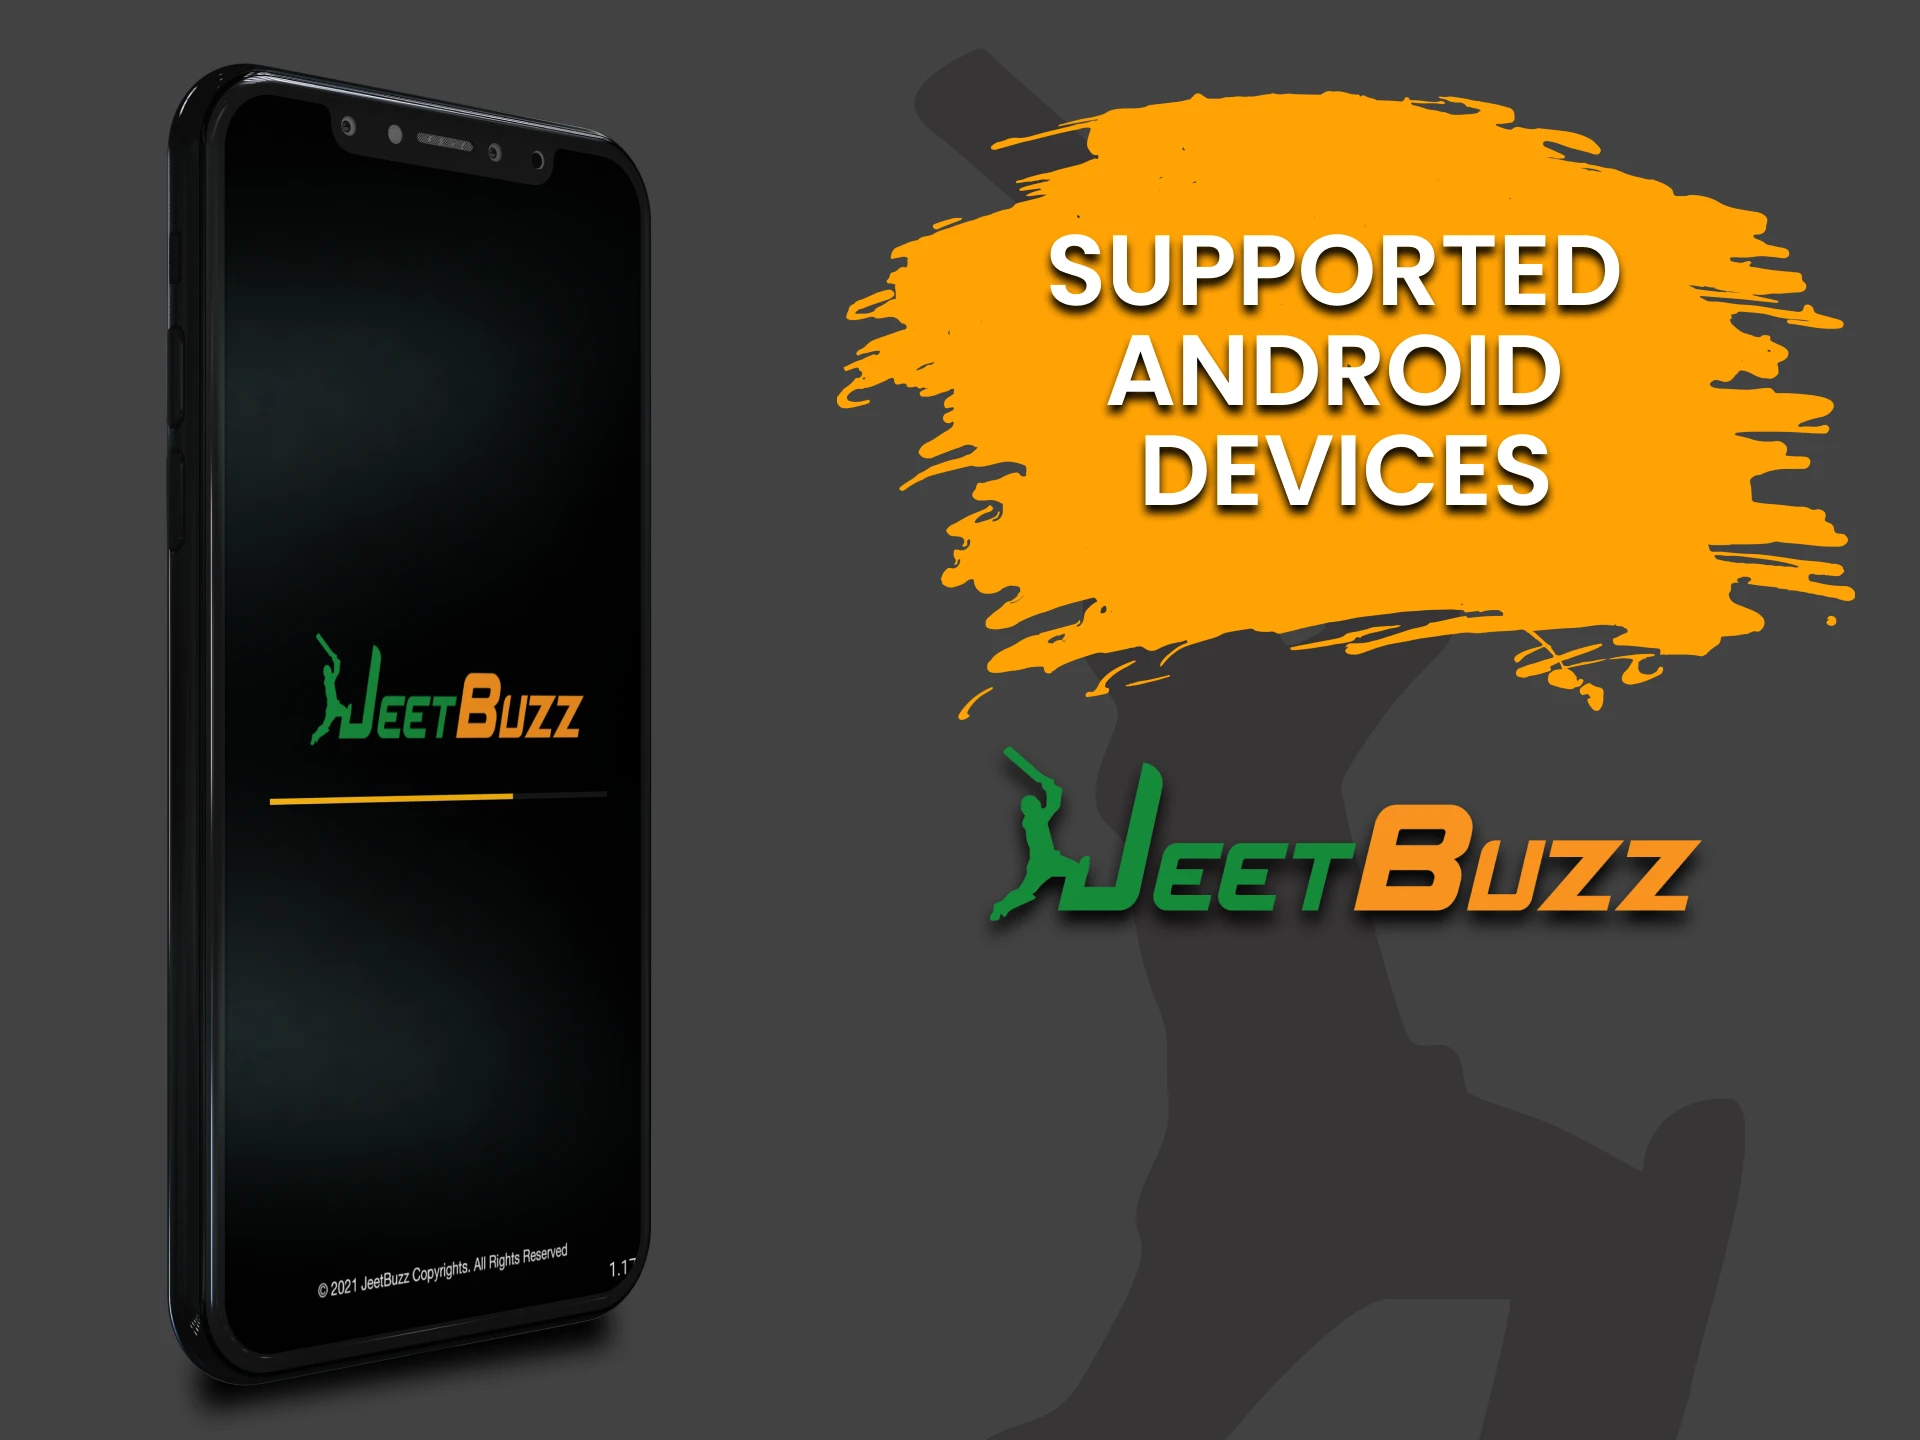 Install the JeetBuzz app for Android.